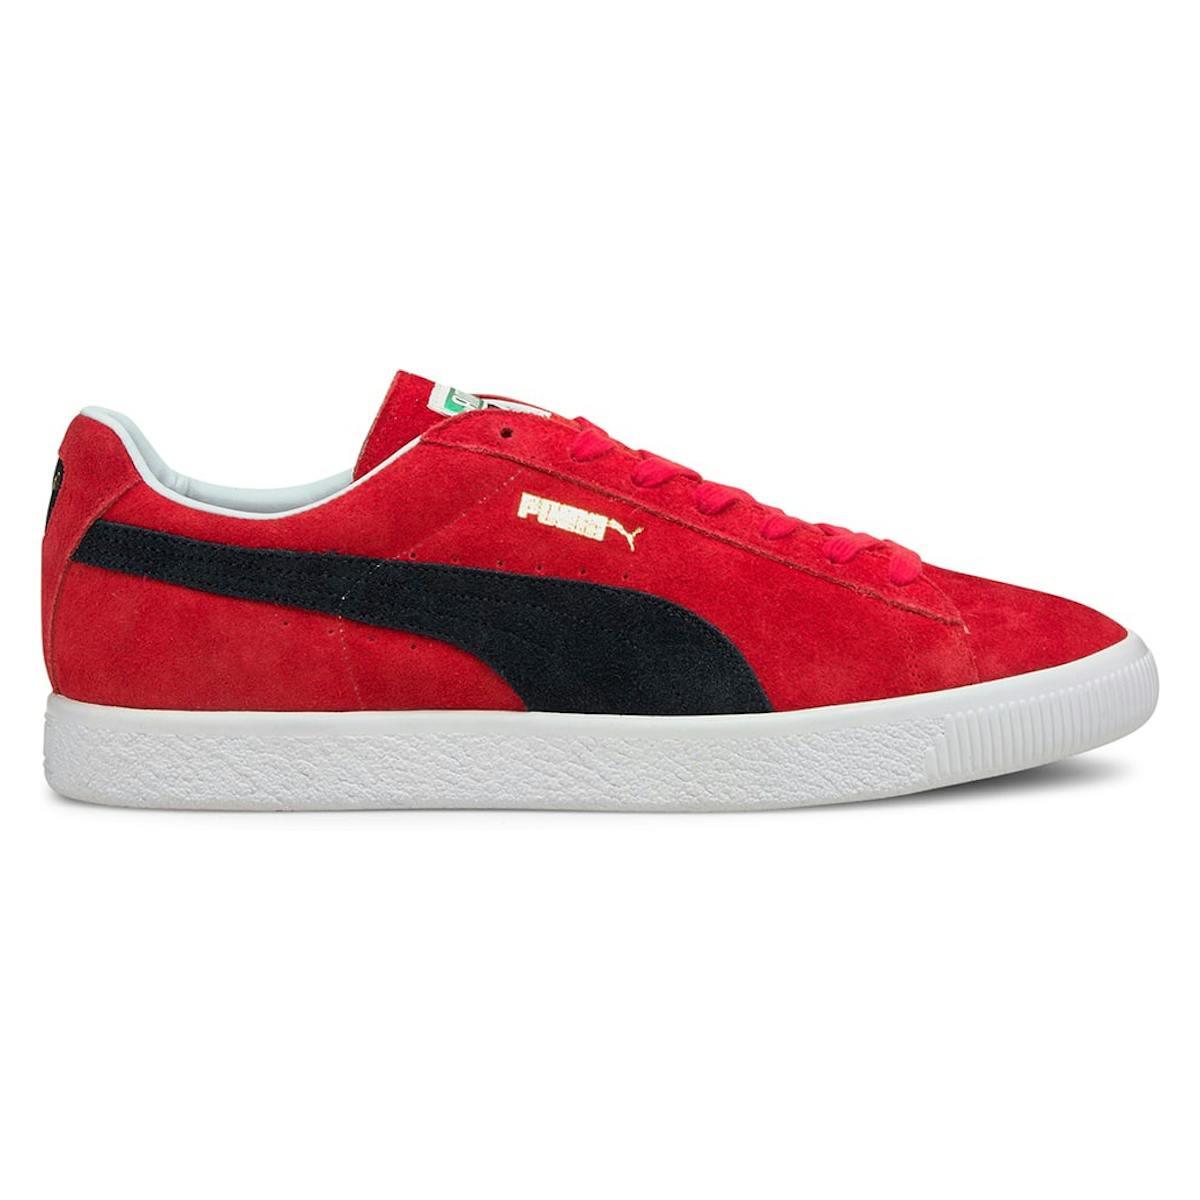 Puma Suede Vintage Made in Japan High Risk Red New Navy